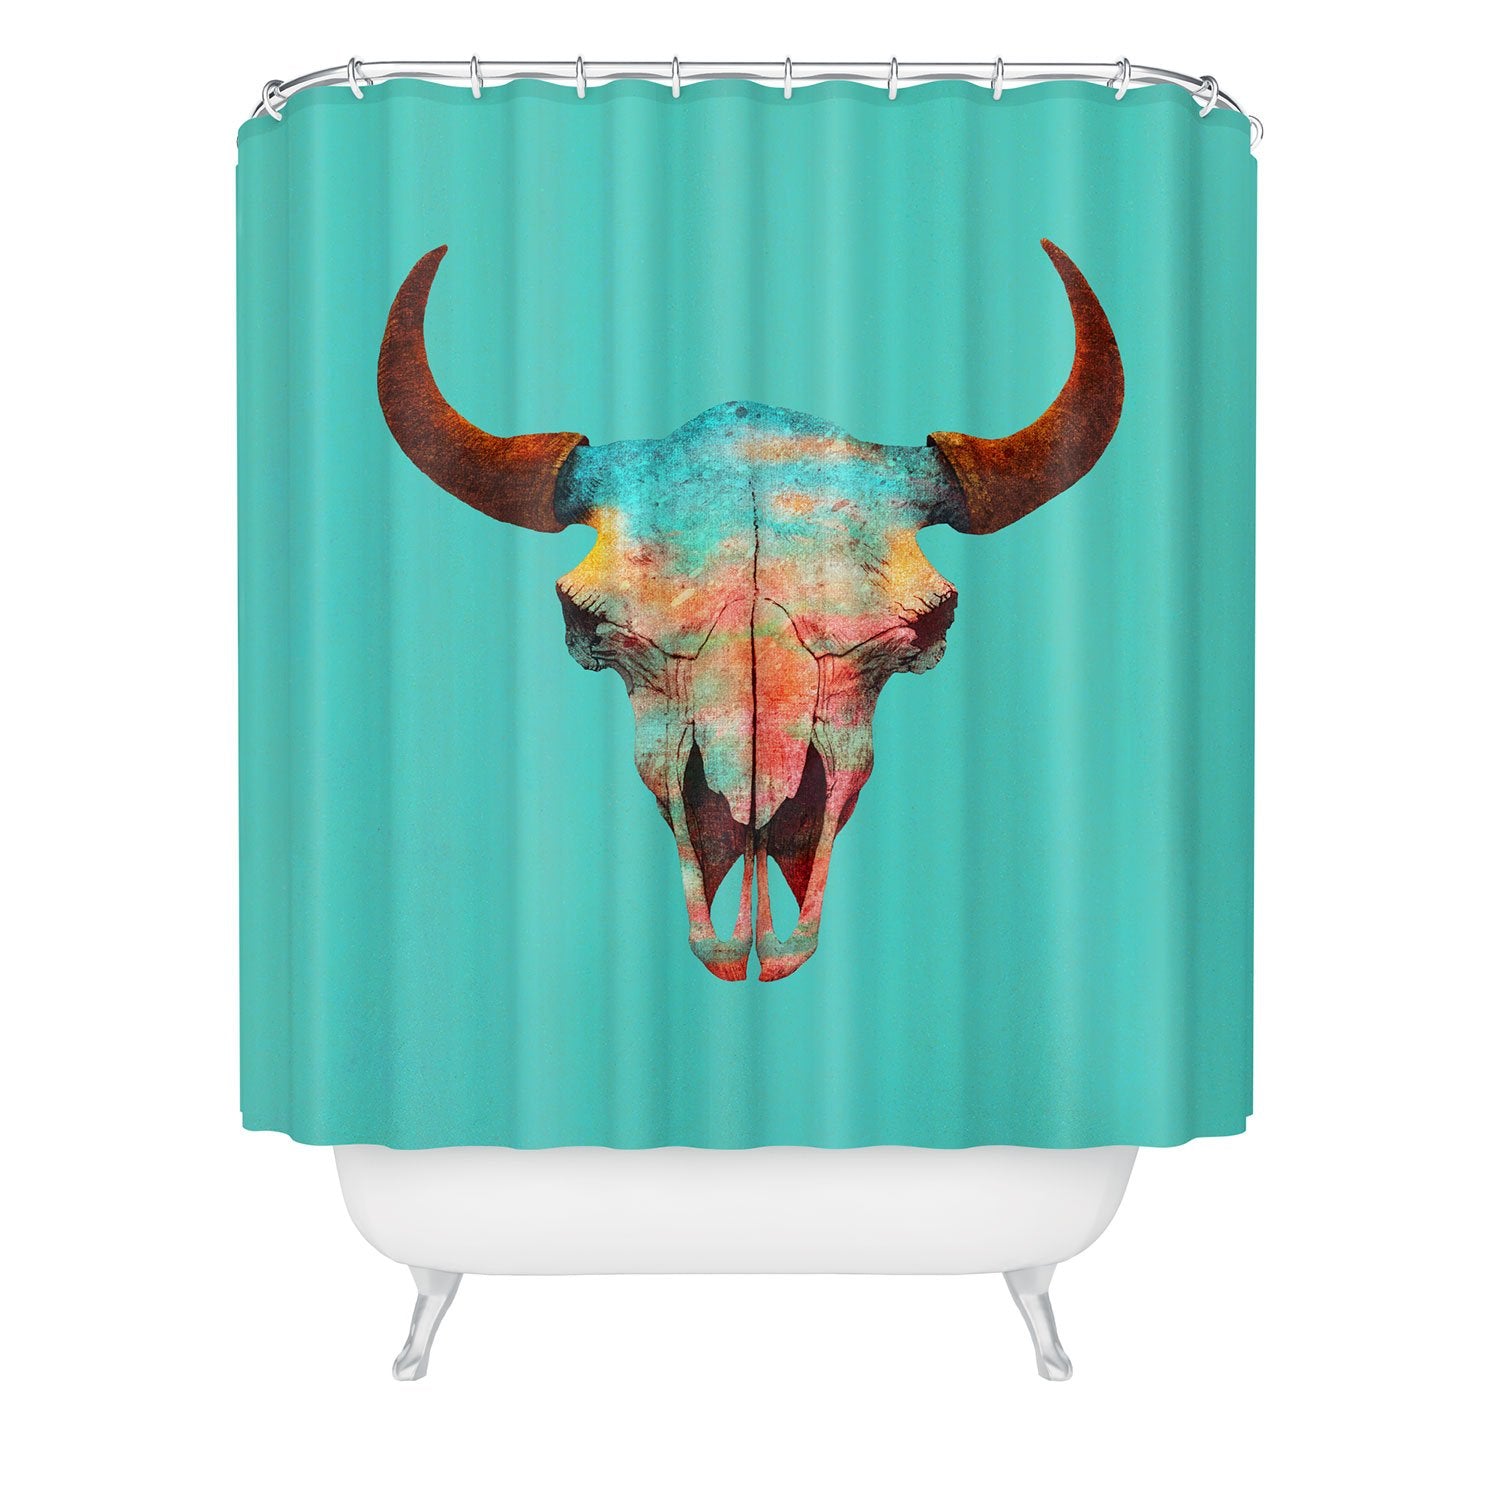 https://cdn.shopify.com/s/files/1/1418/4810/products/terry-fan-turquoise-sky-shower-curtain-whitebg_1600x.jpg?v=1639235554